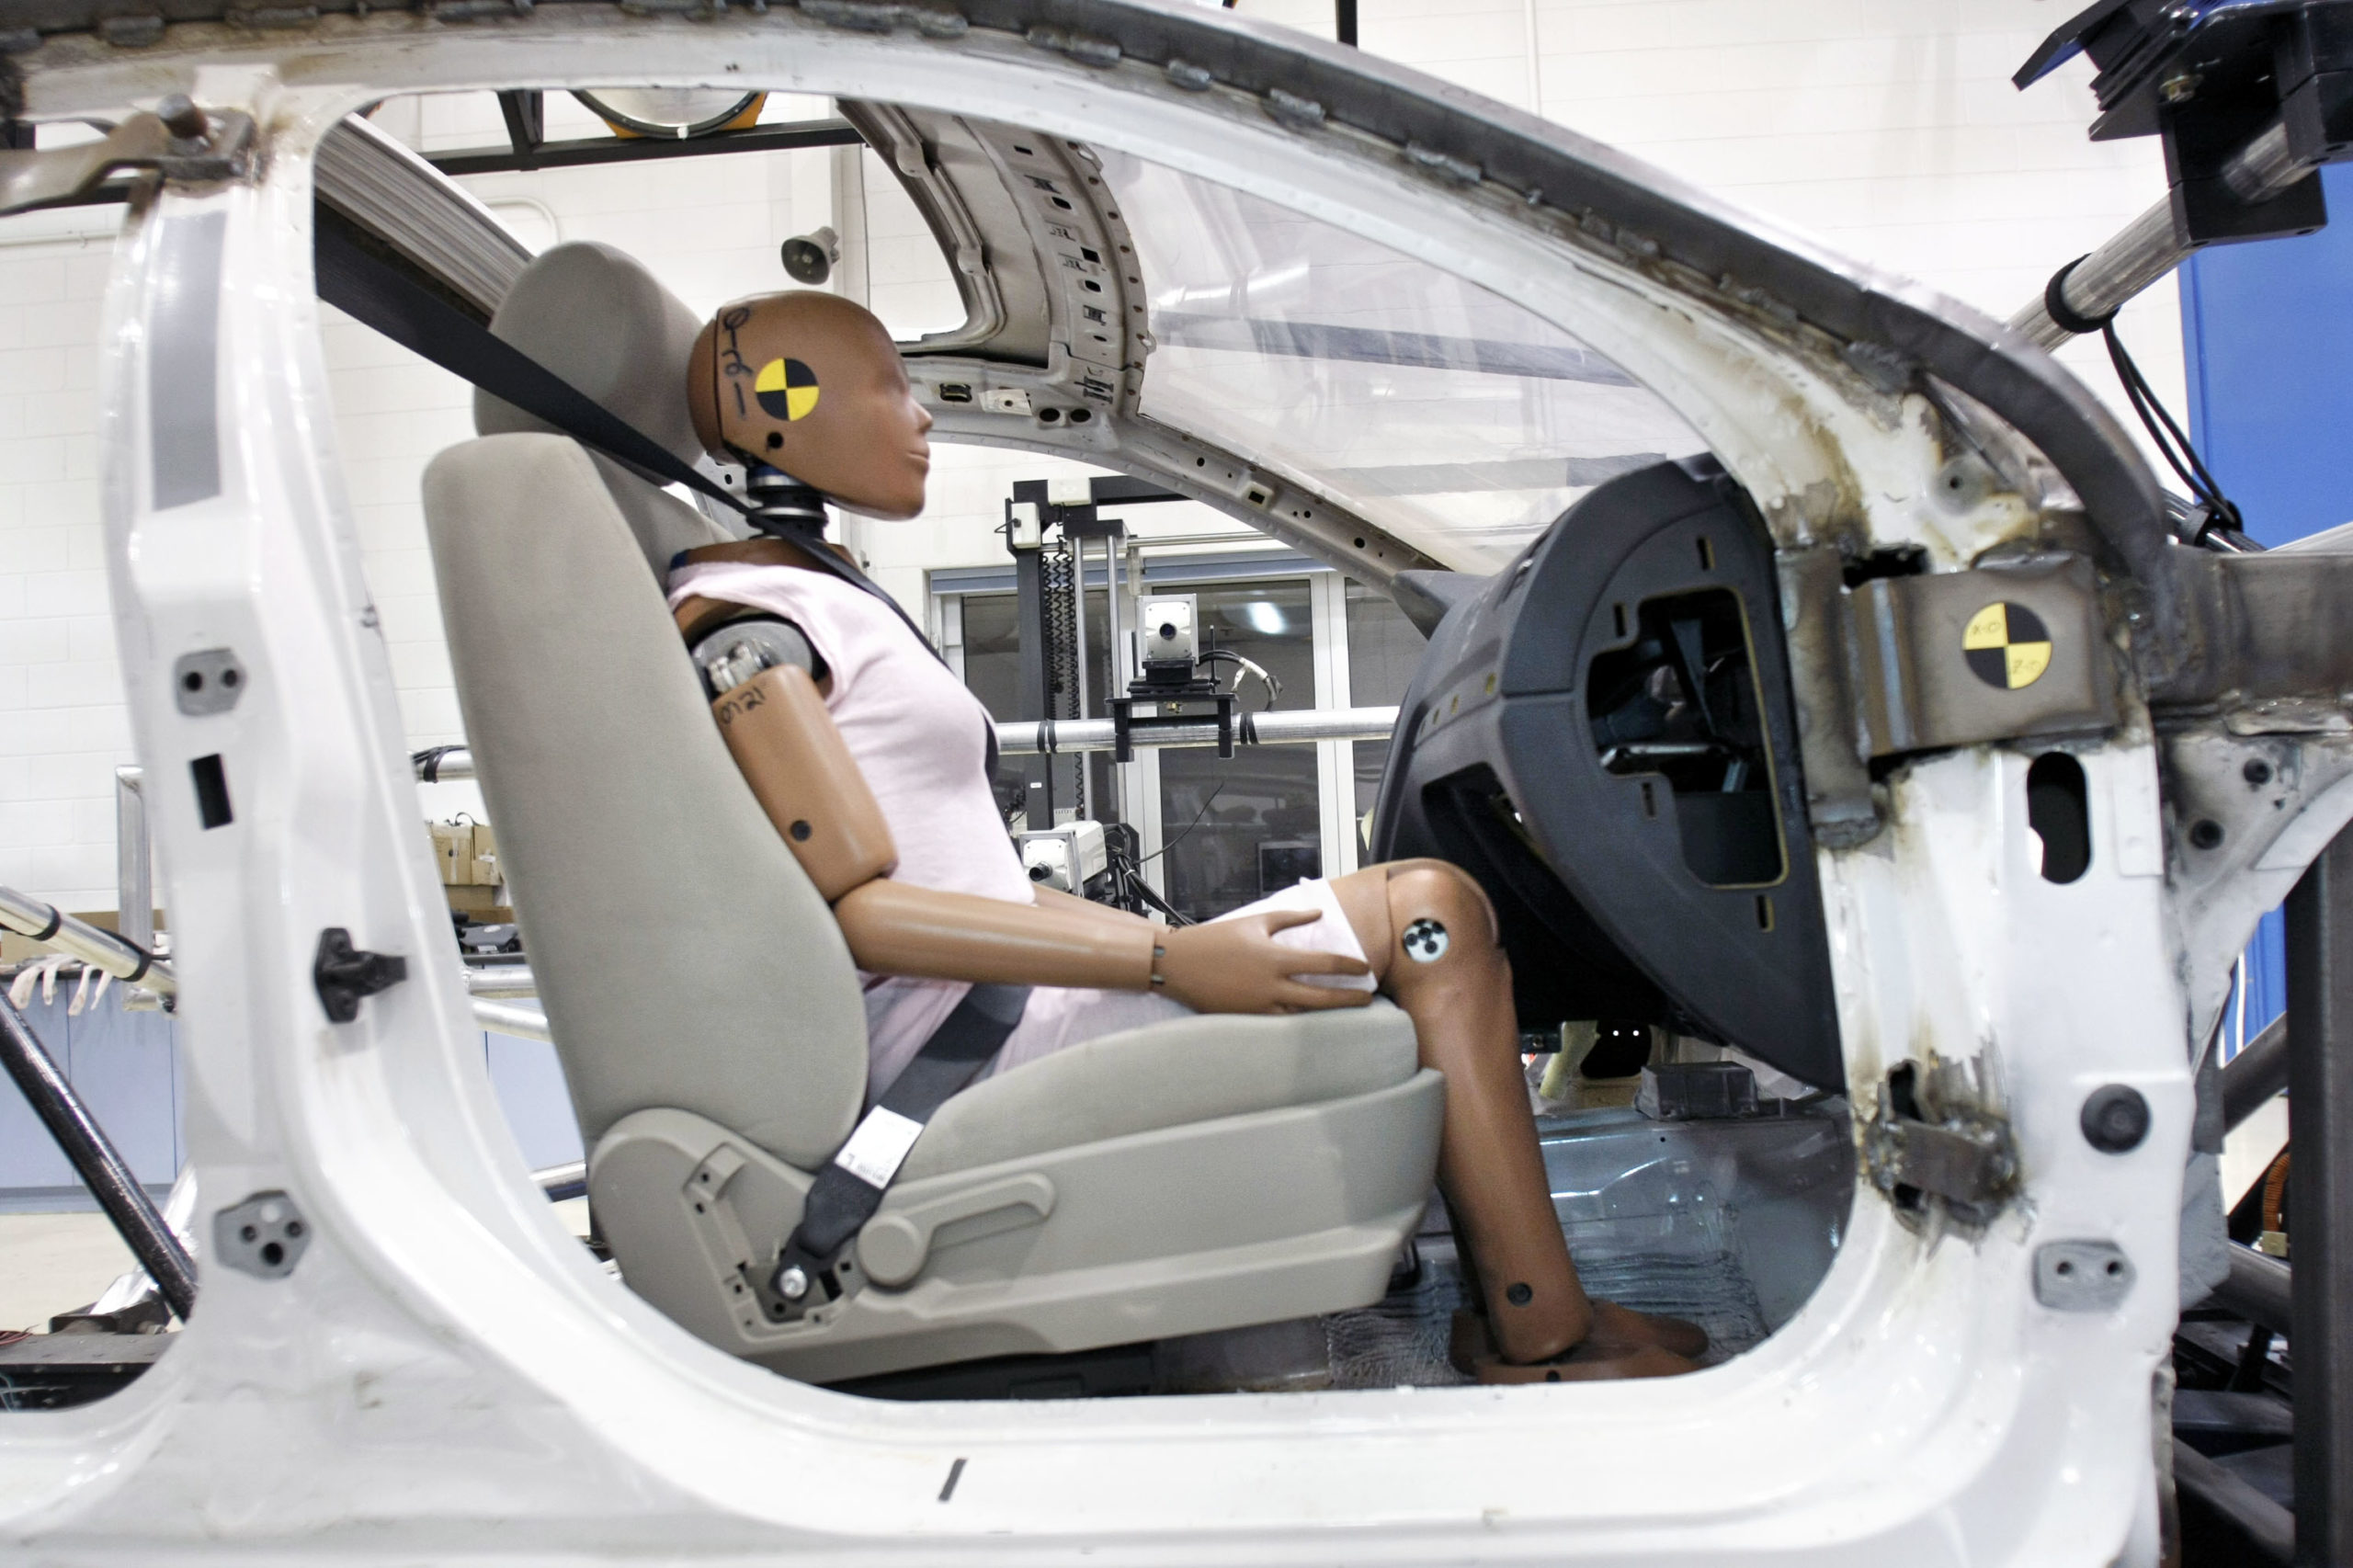 AUBURN HILLS, MI - AUGUST 19: A crash-test dummy sits in a testing sled at Takata's current crash-testing facility August 19, 2010 in Auburn Hills, Michigan. Takata dedicated a new, high-tech 18,000 square-foot sled crash simulation facility today that cost $14.6 million and is expected to be built and operational by August of 2011. (Photo by Bill Pugliano/Getty Images)